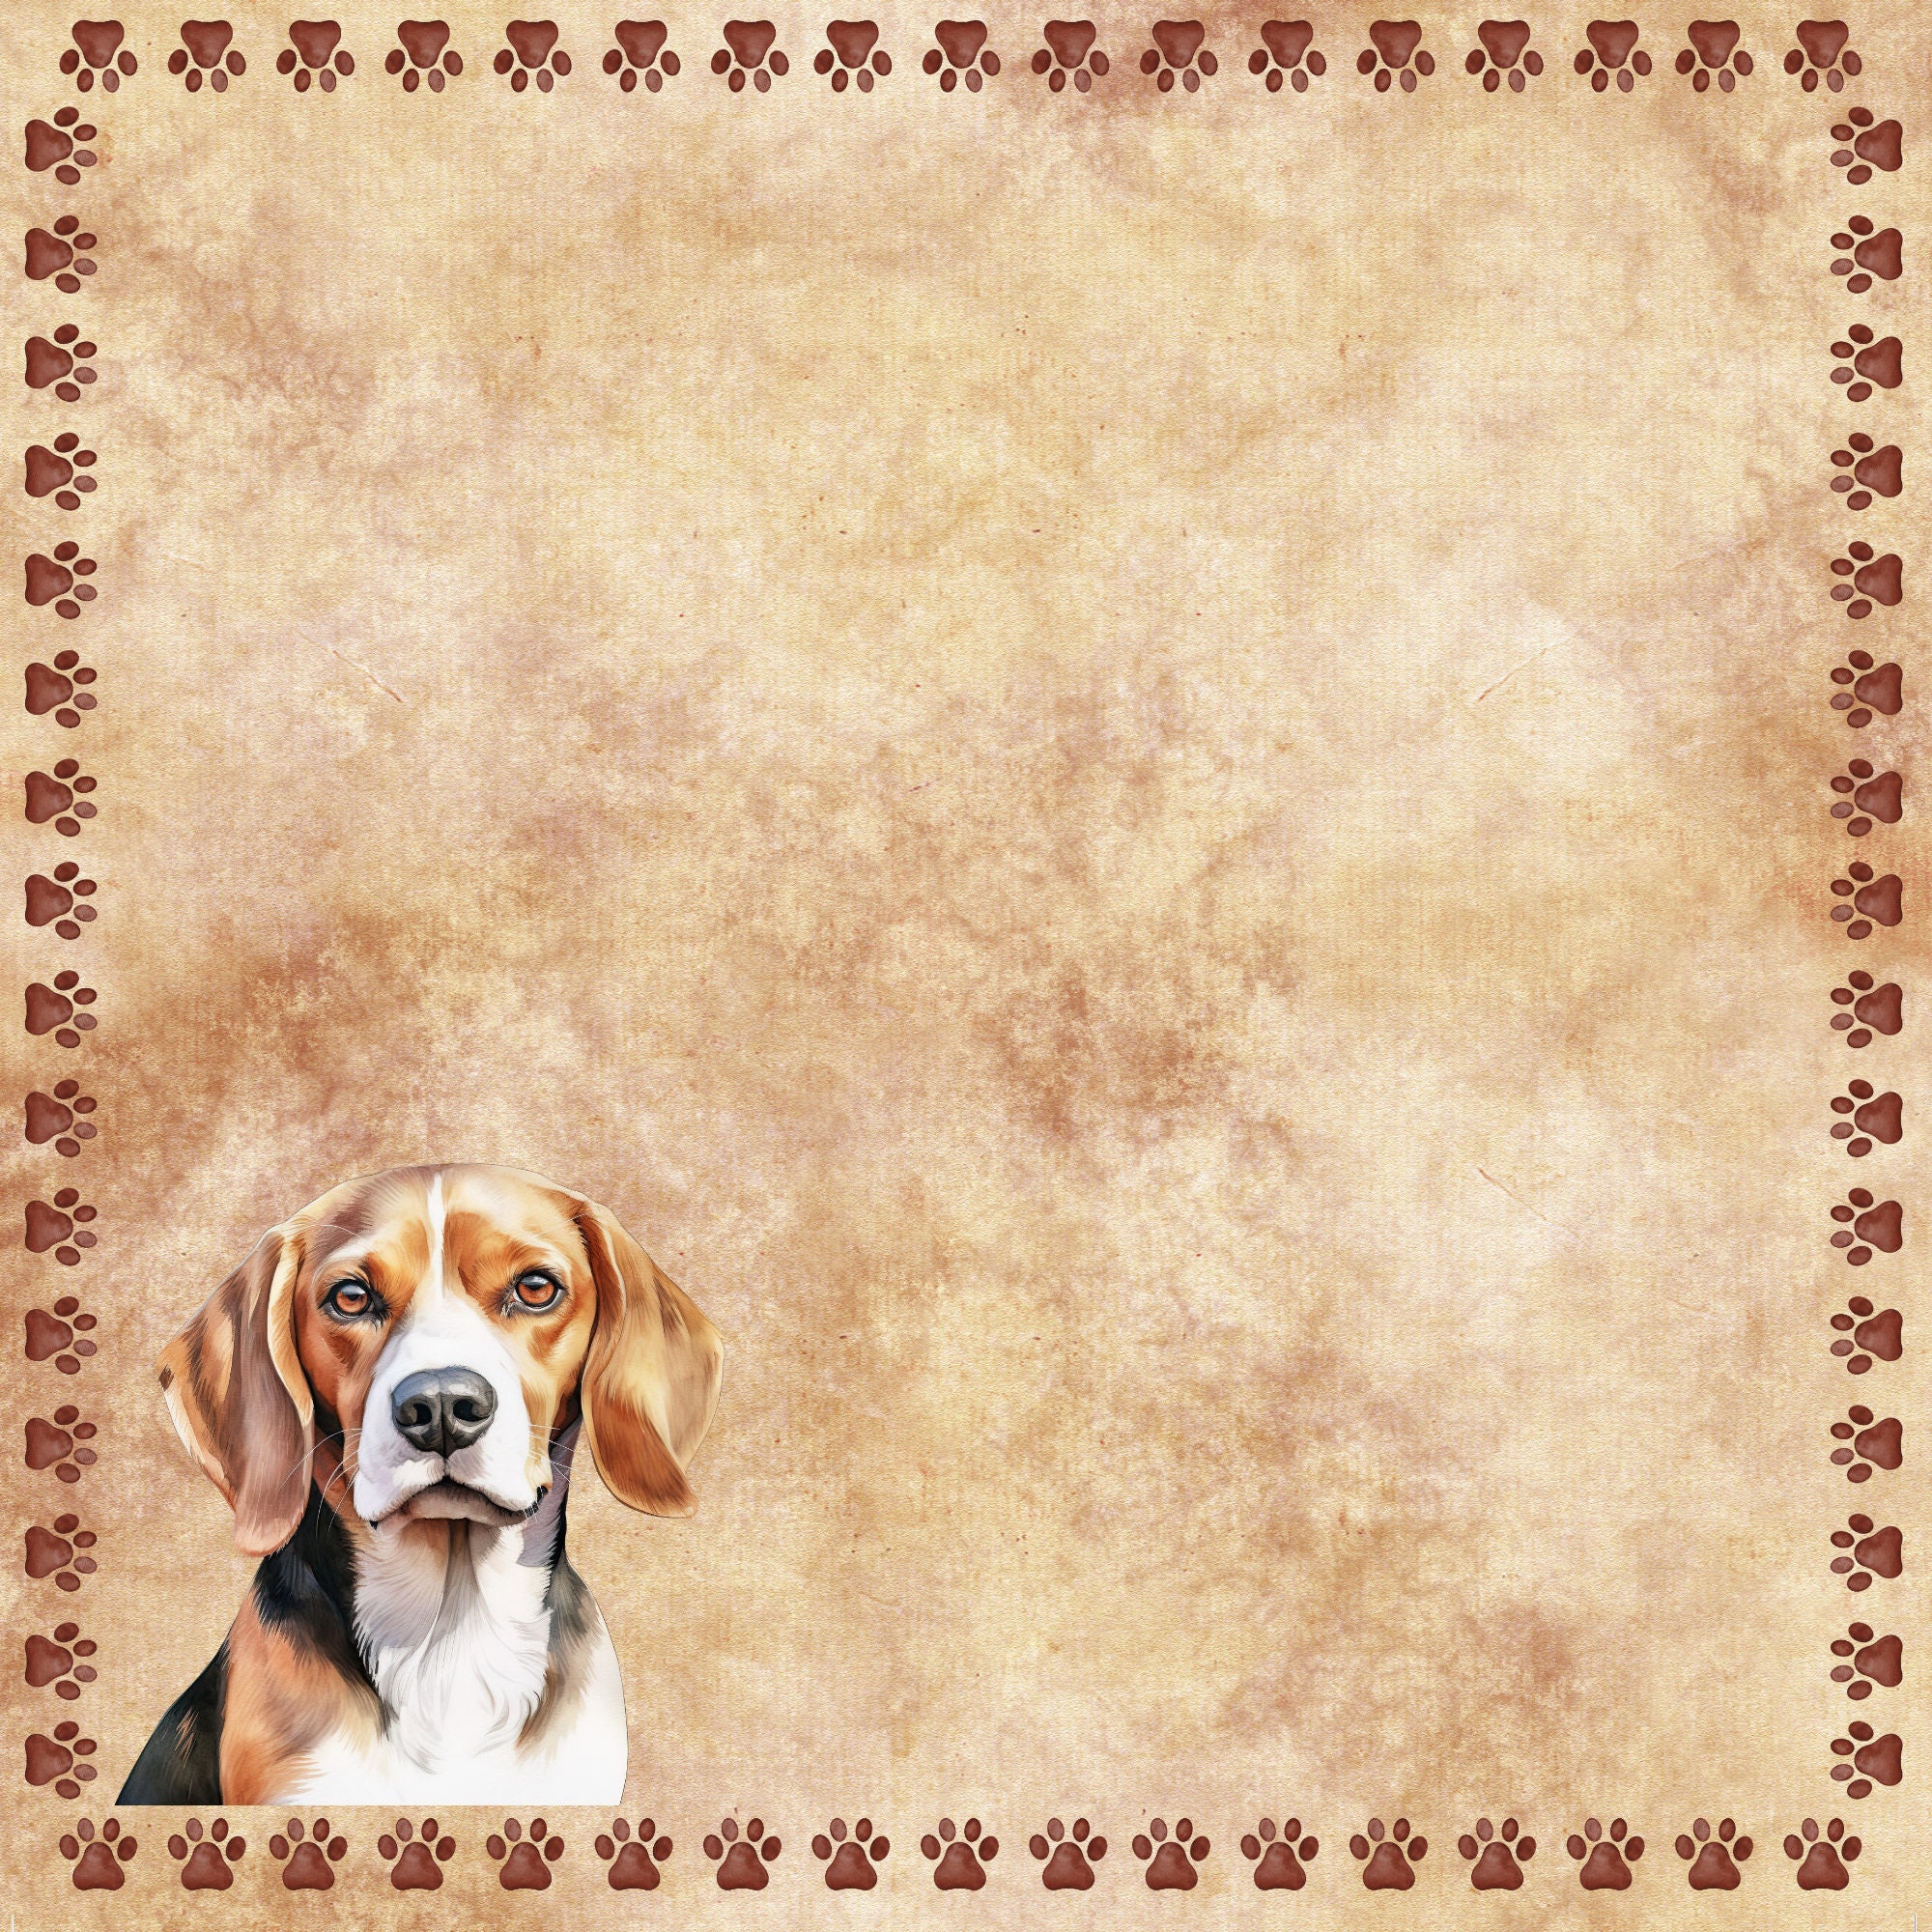 Dog Breeds Collection Beagle 12 x 12 Double-Sided Scrapbook Paper by SSC Designs